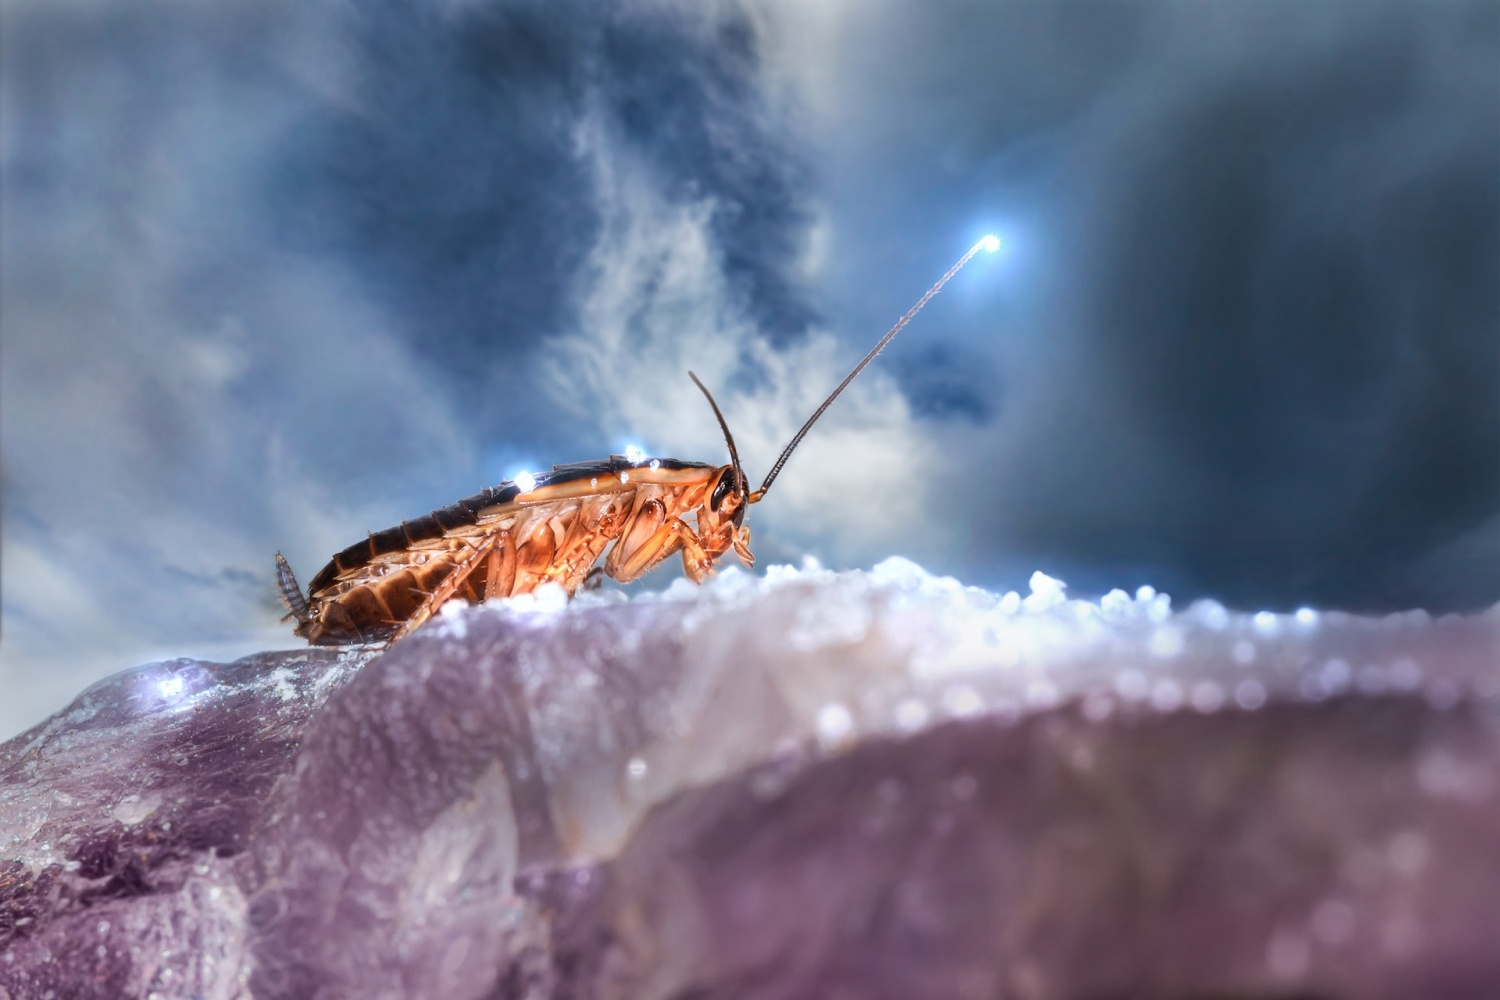 Robot Laser Programmed to Zap Cockroaches Over a Meter Away: The Ultimate Pest Control?